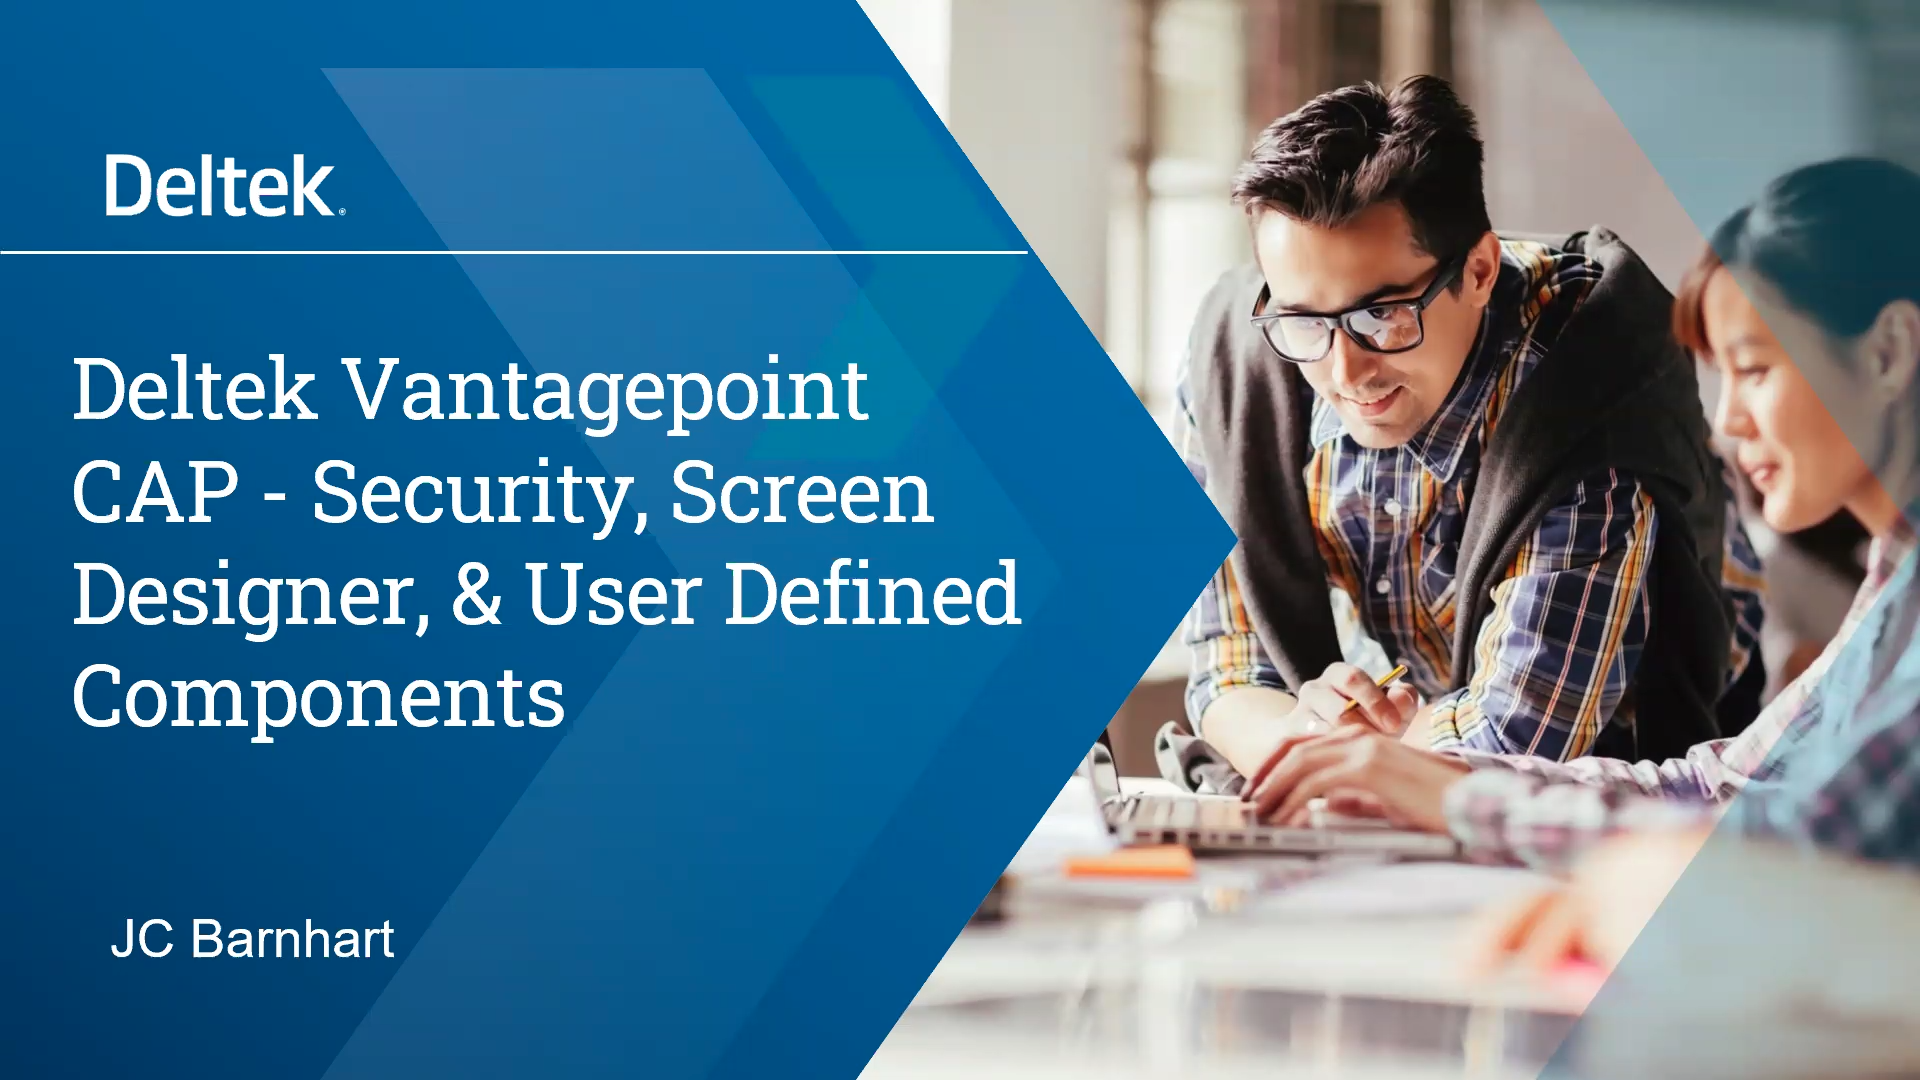 Security, Screen Designer, and User Defined Components